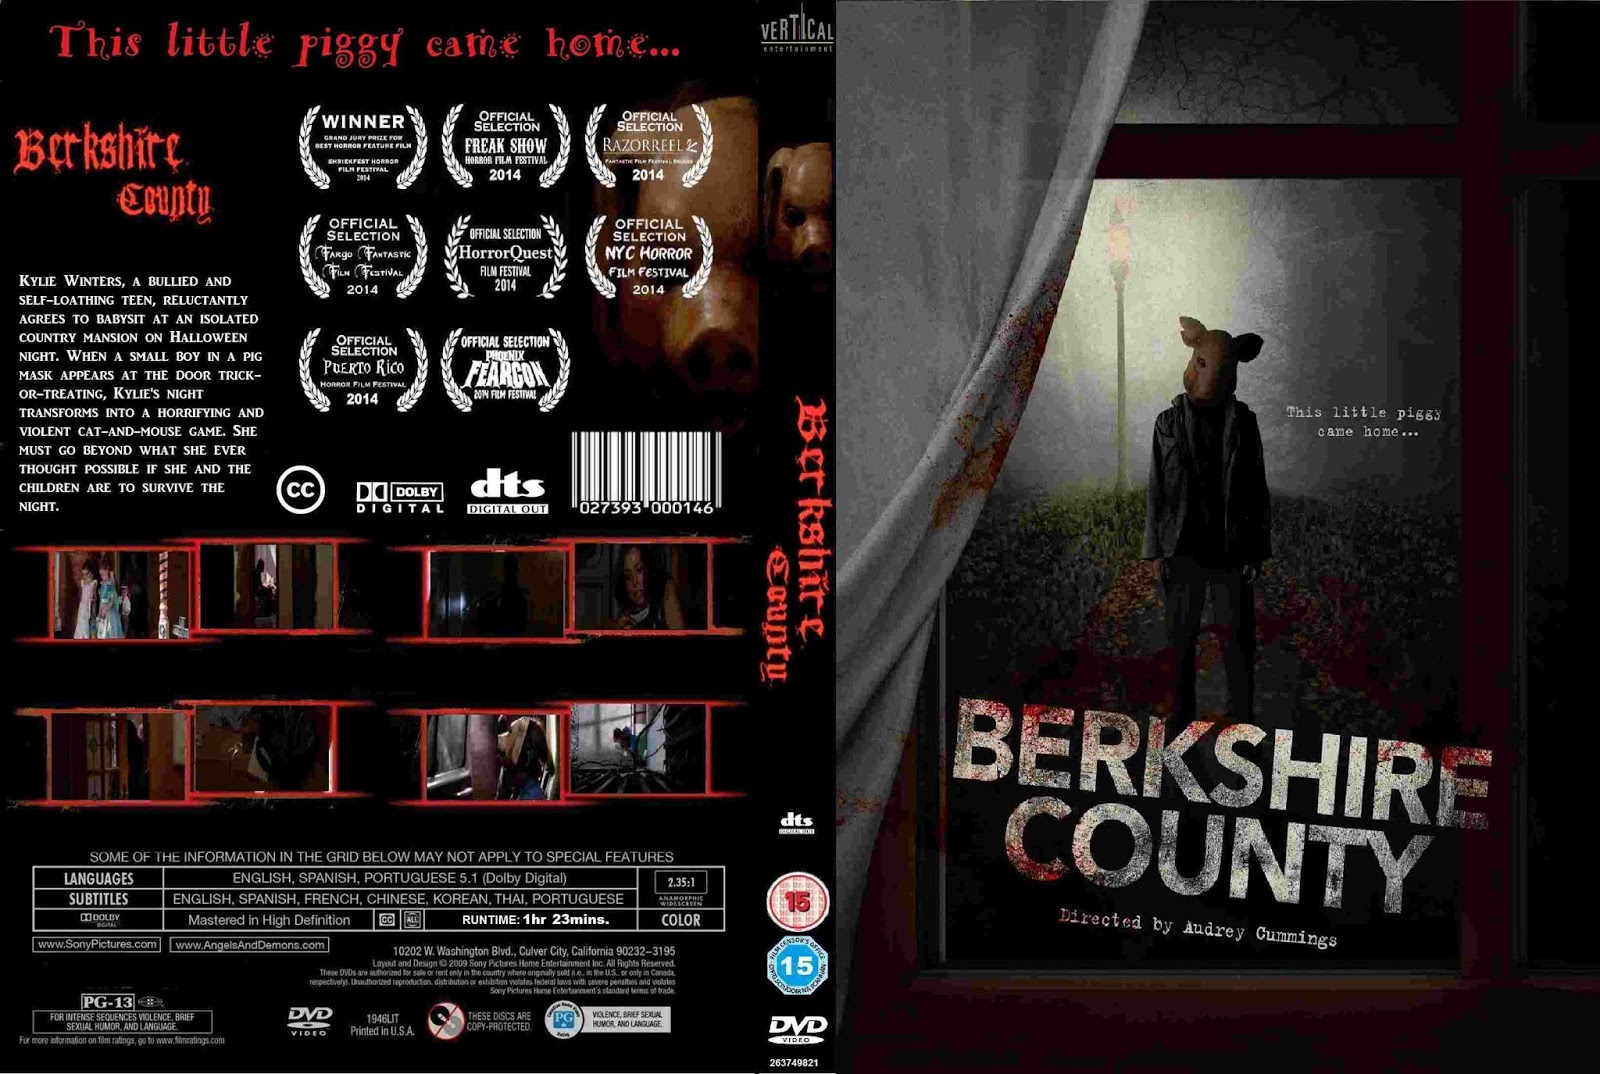 BERKSHIRE COUNTY (TORMENTED) (2014) — CULTURE CRYPT